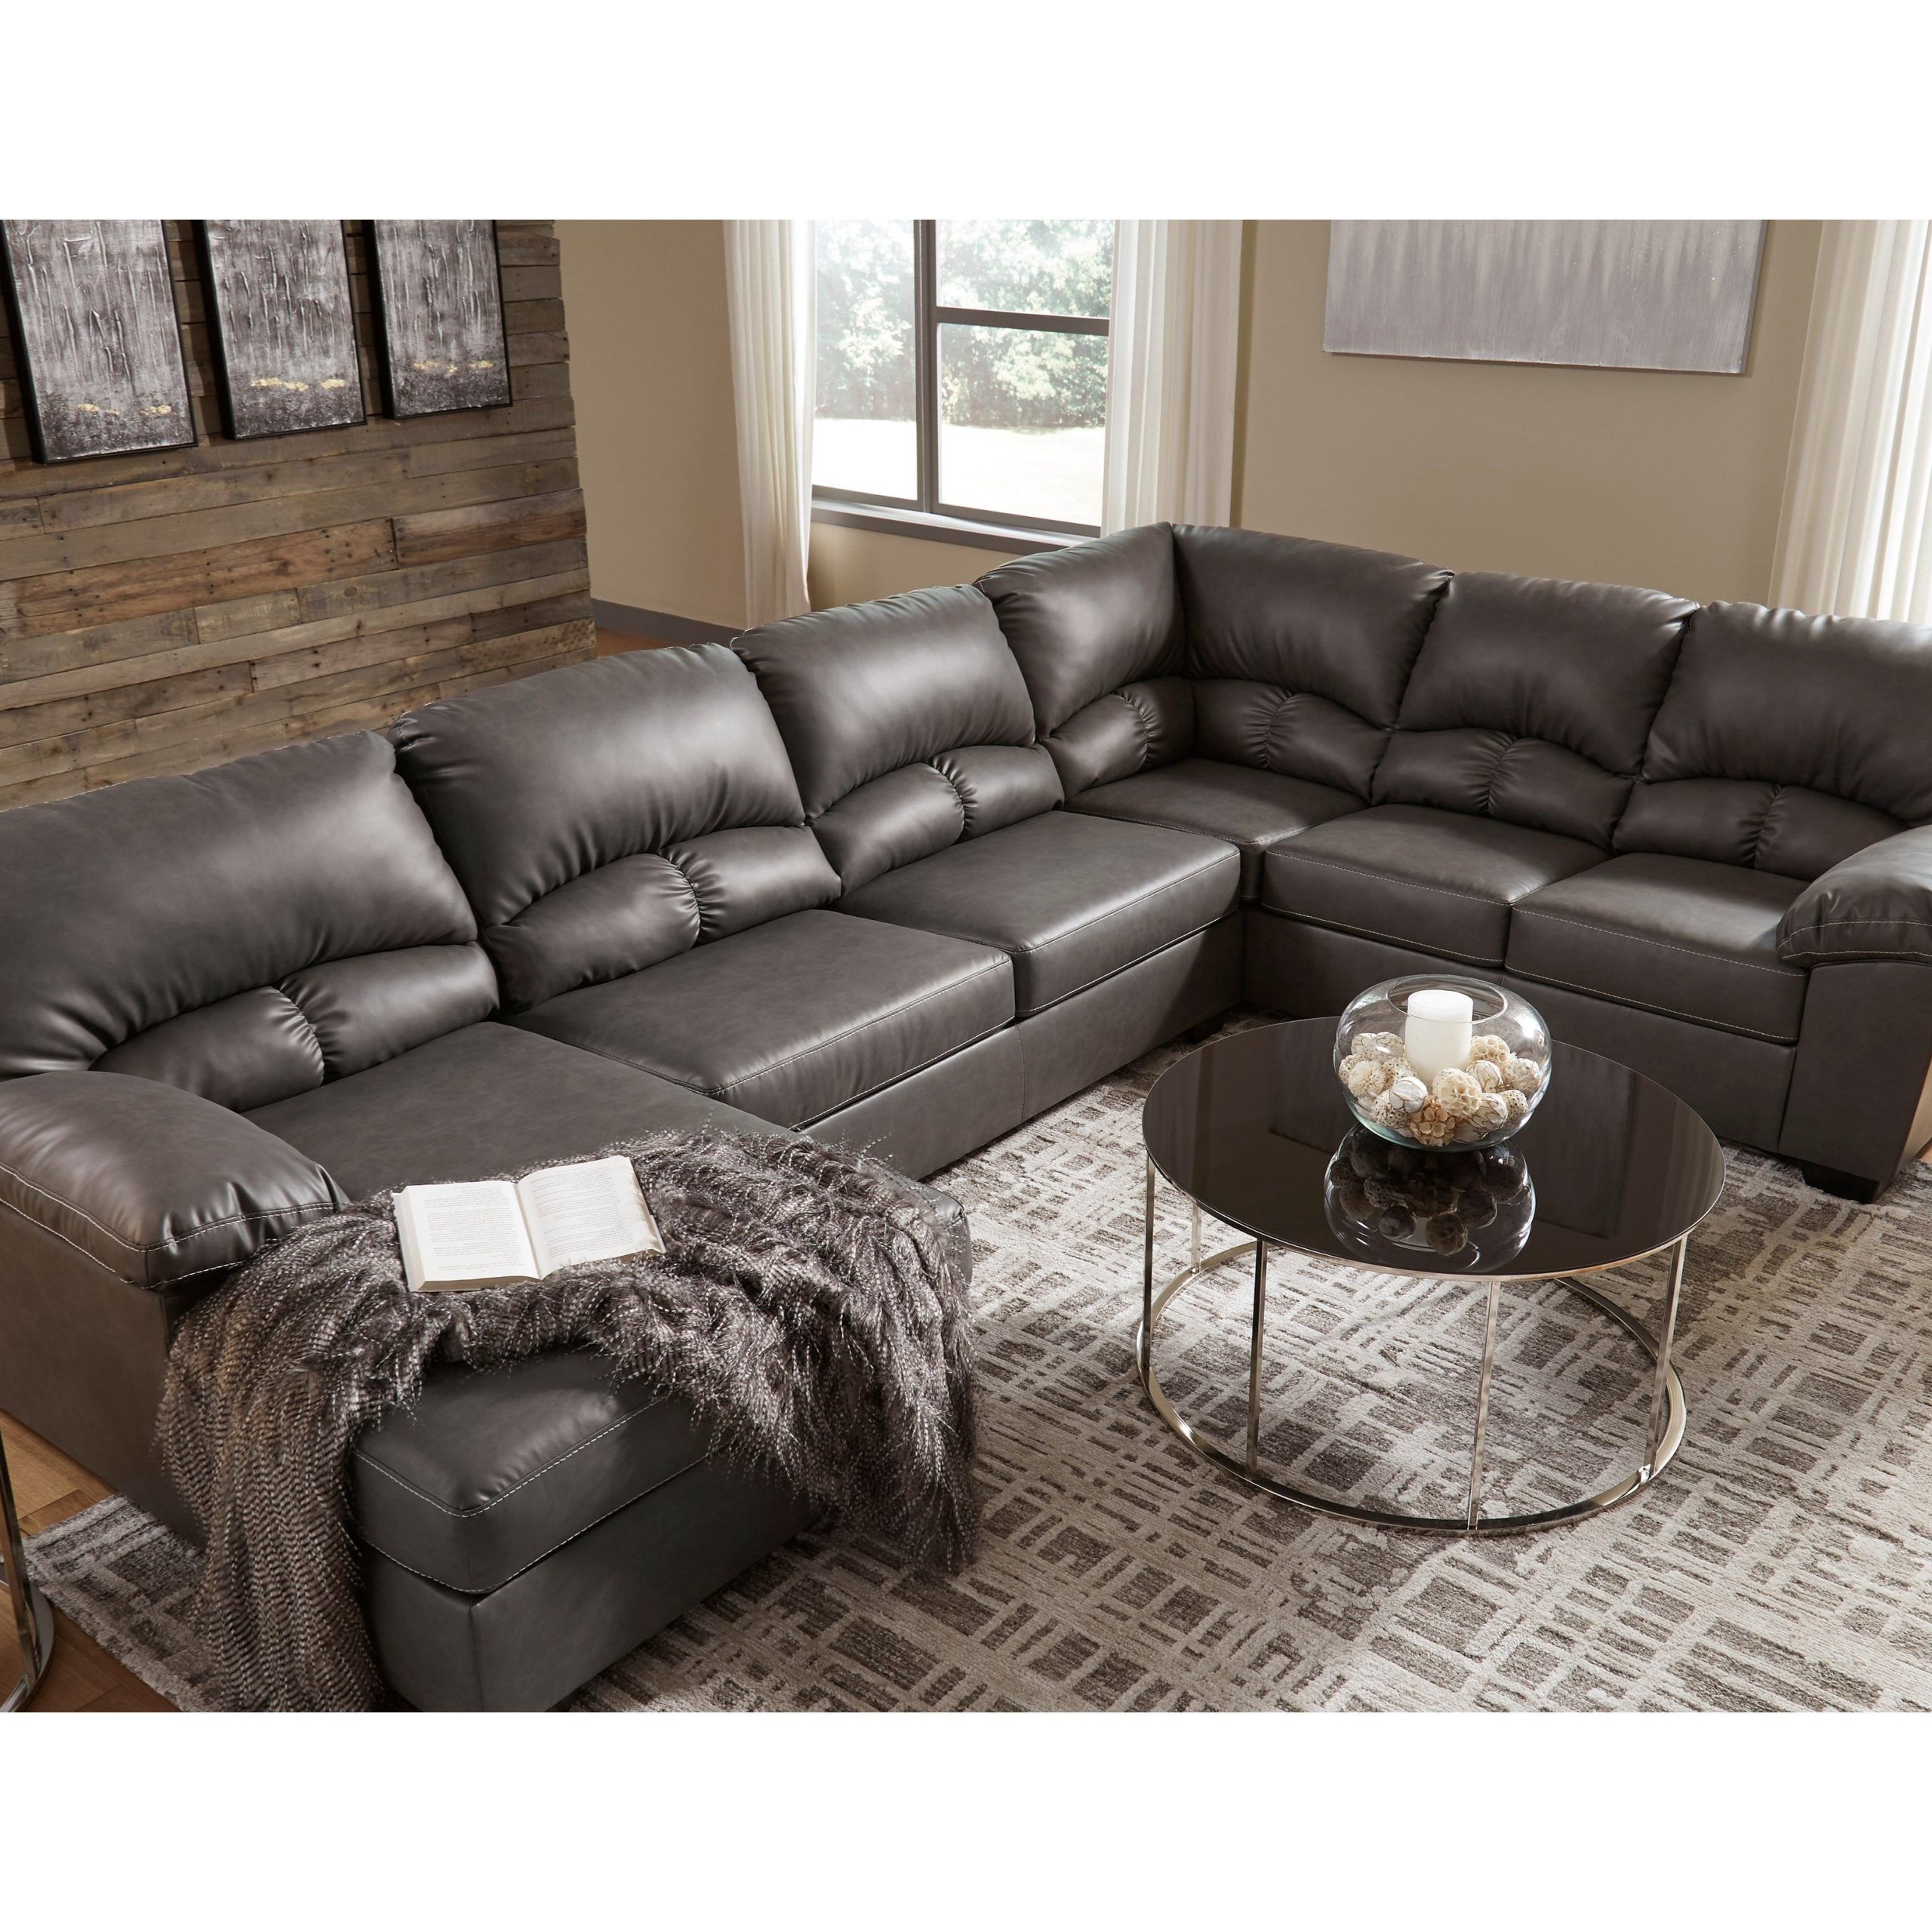 Benchcraftashley Aberton Faux Leather 3 Piece Sectional With Chaise In 3 Piece Leather Sectional Sofa Sets (View 2 of 20)